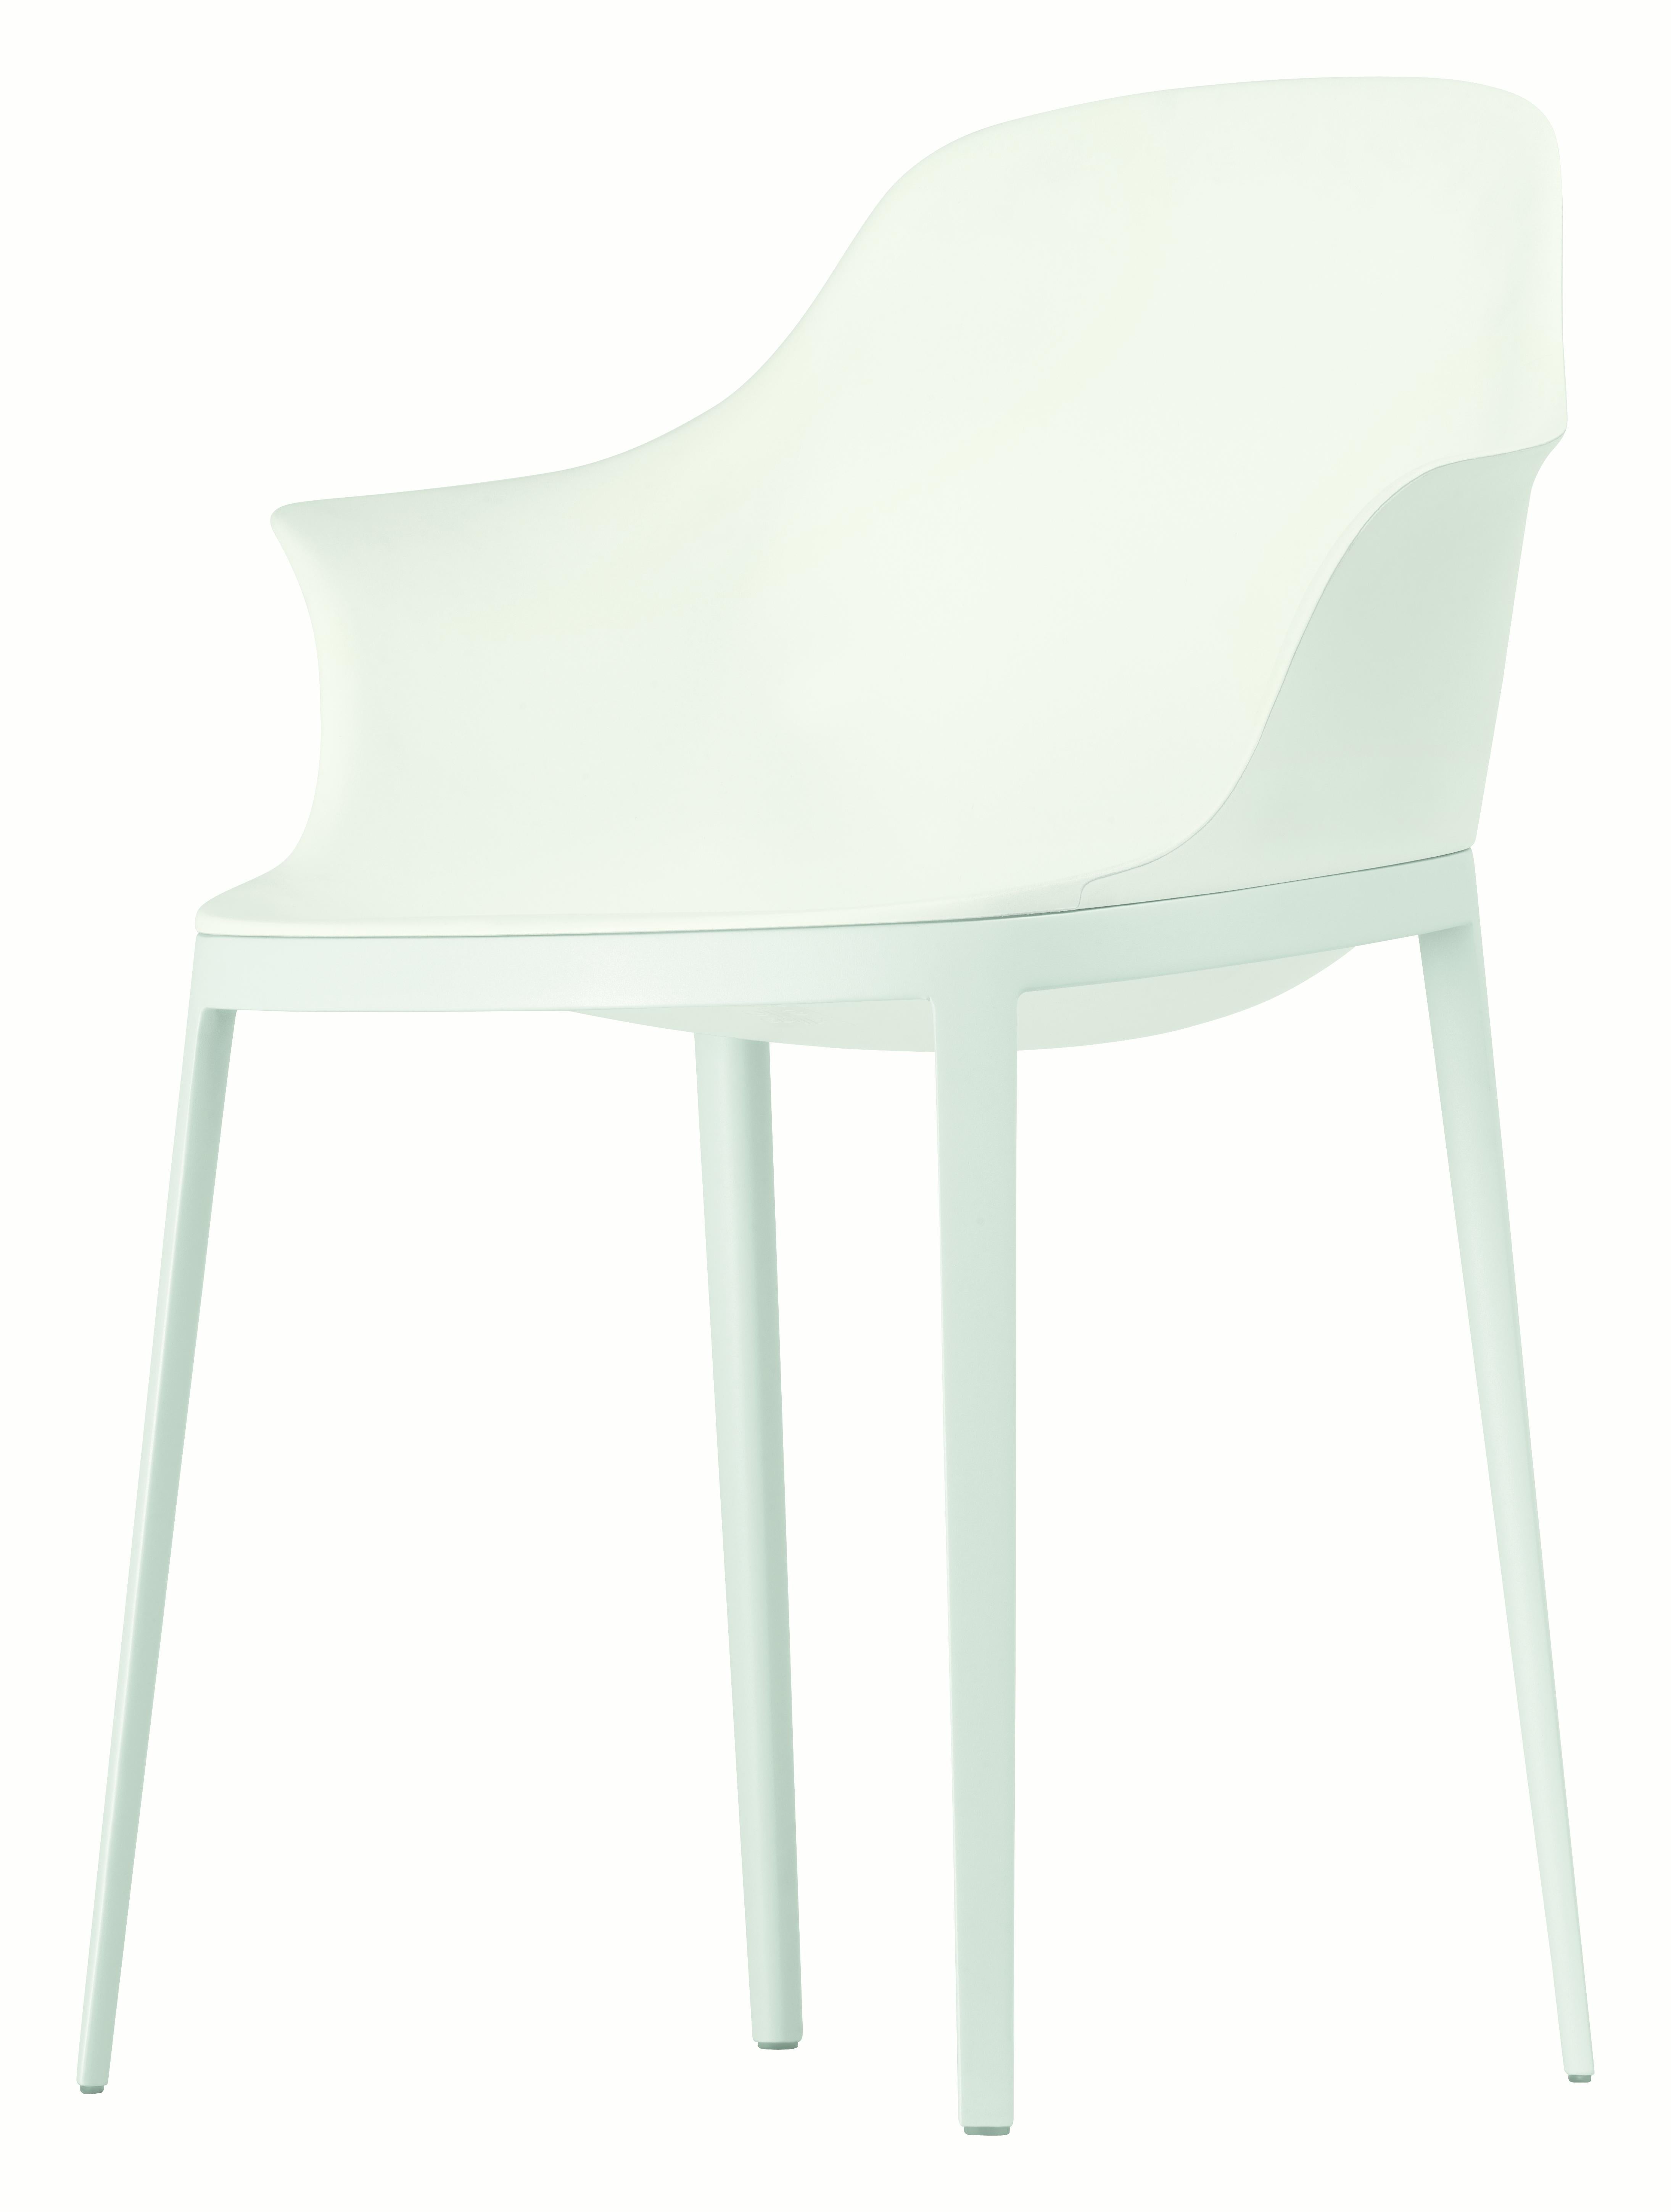 Alias 073 Elle Armchair in White Lacquered Aluminum Frame by Eugeni Quitllet

Chair with lacquered aluminium structure; shell with armrests in polyurethane TECH®.

Born in Ibiza in 1972, where he studied design at the institute of art. In 1996,